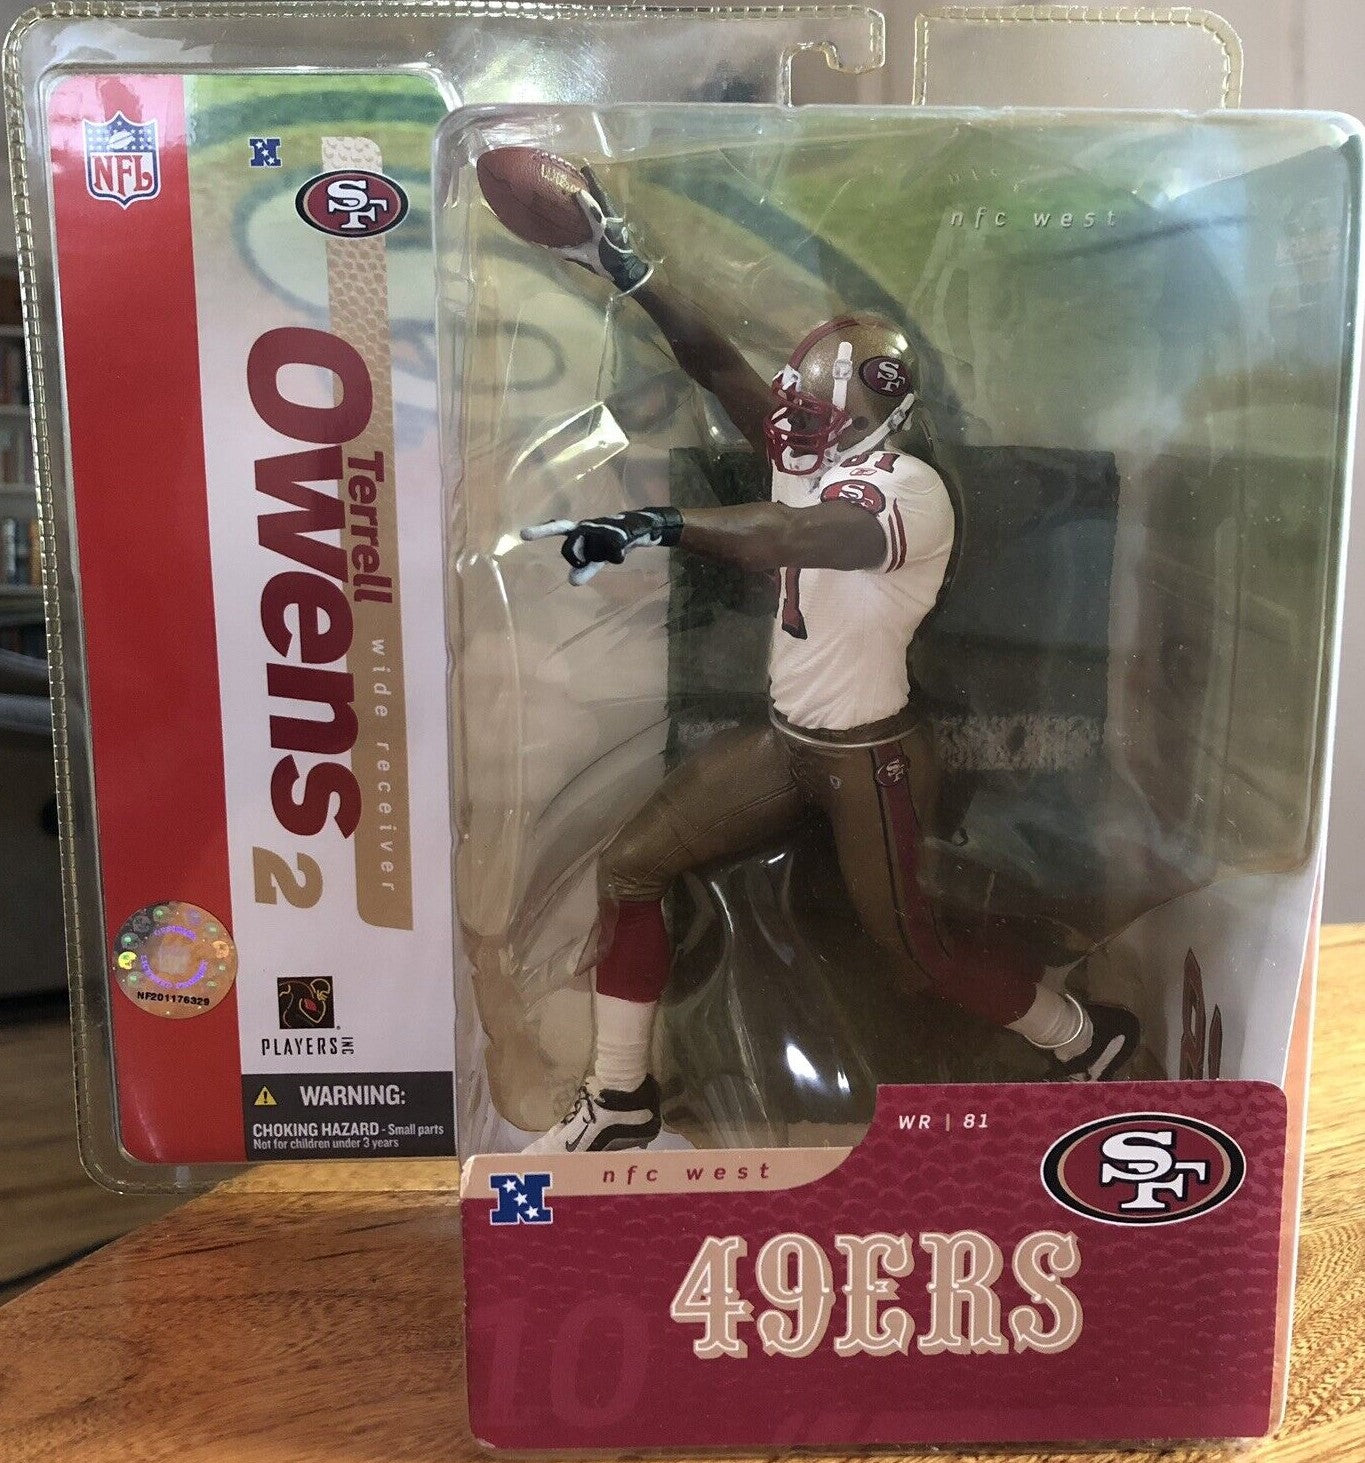 NFL Football series 10 TERRELL OWENS variant/chase action figure 